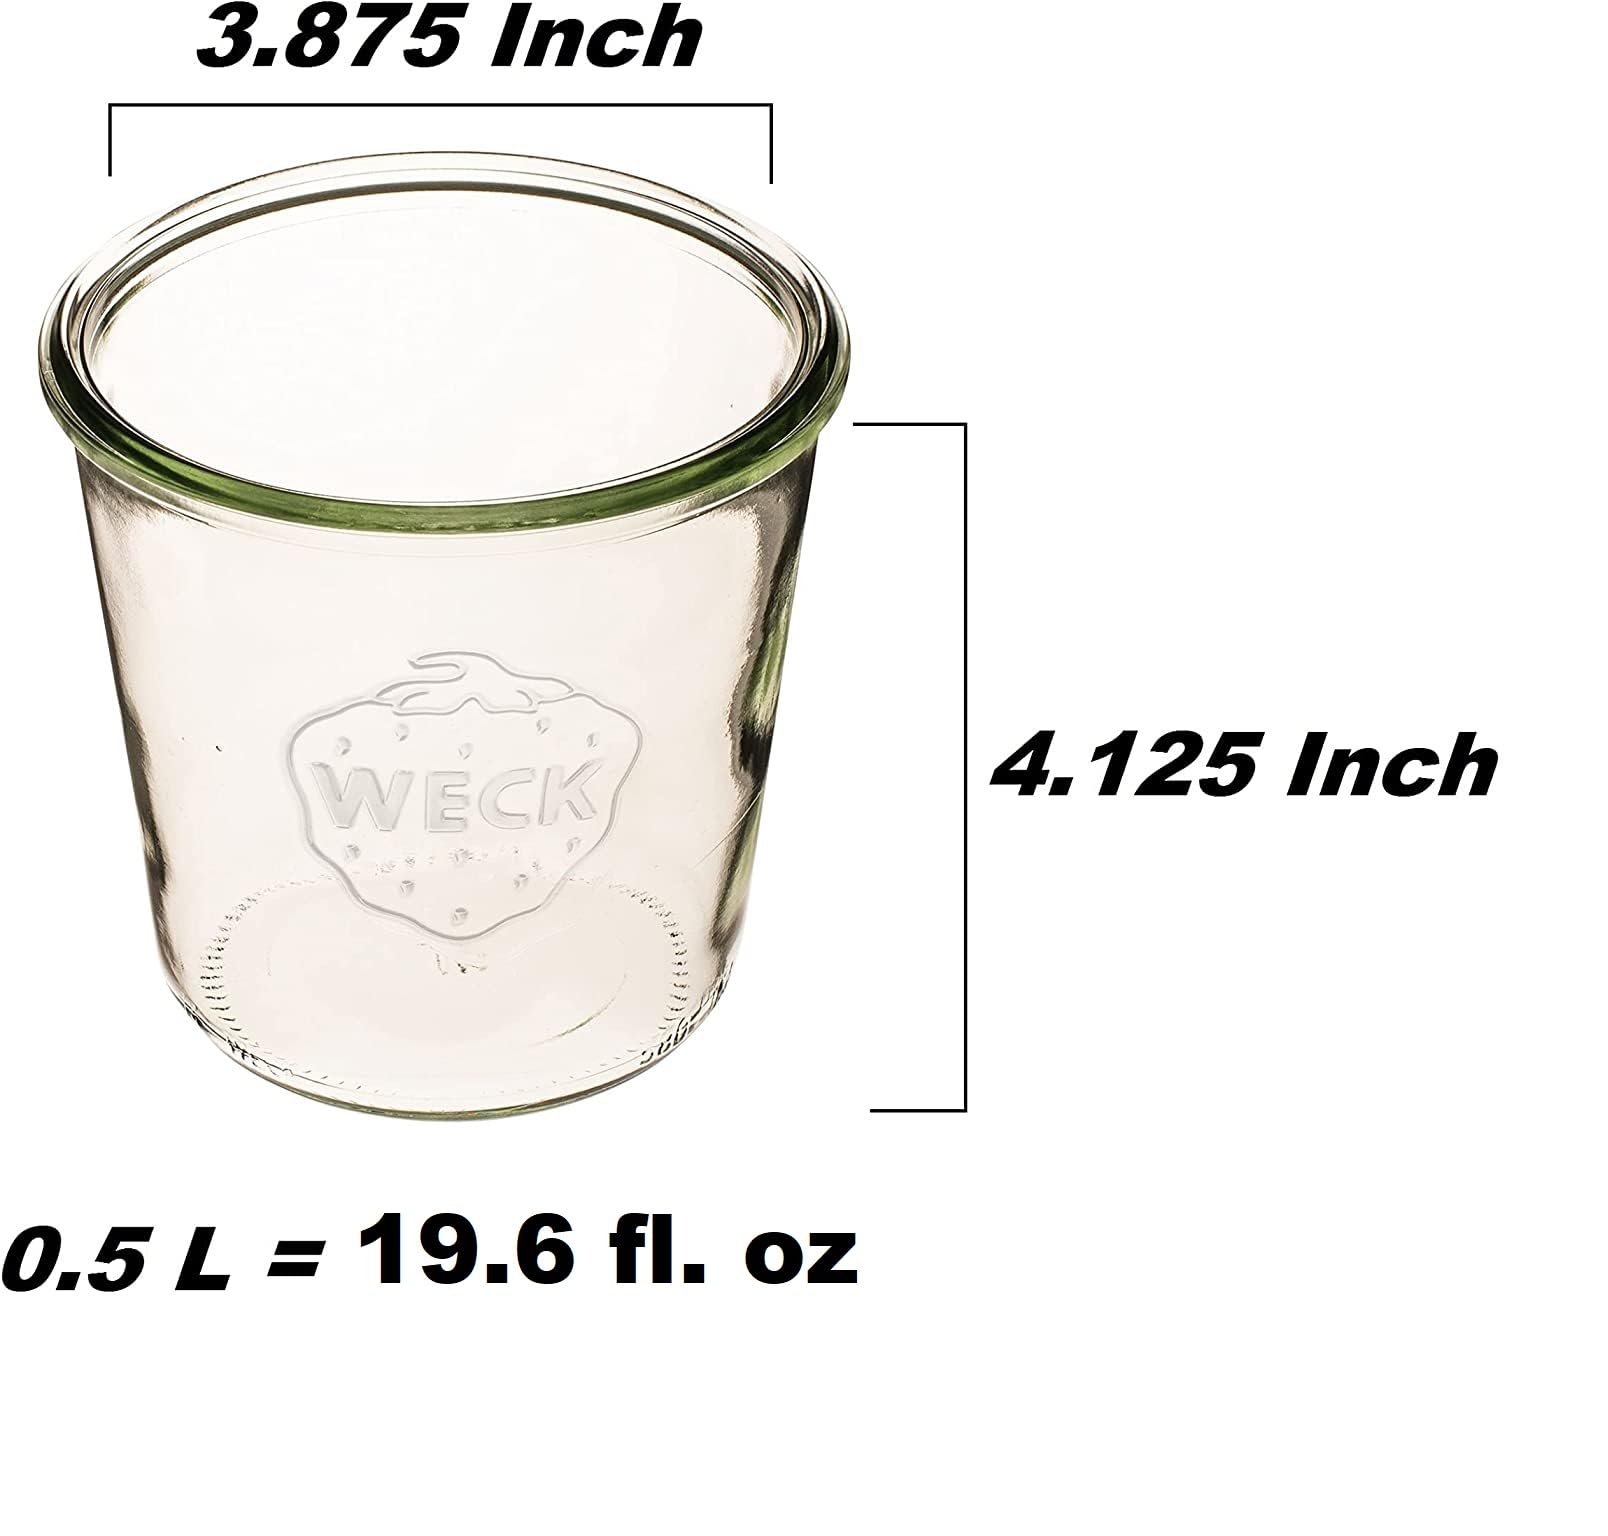 Weck Canning Jars 742 - Weck Mold Jars made of Transparent Glass - Eco-Friendly Canning Jar - Storage for Food, Yogurt with Air Tight Seal and Lid - 1/2 Liter Tall Jars Set - (2 Jars)